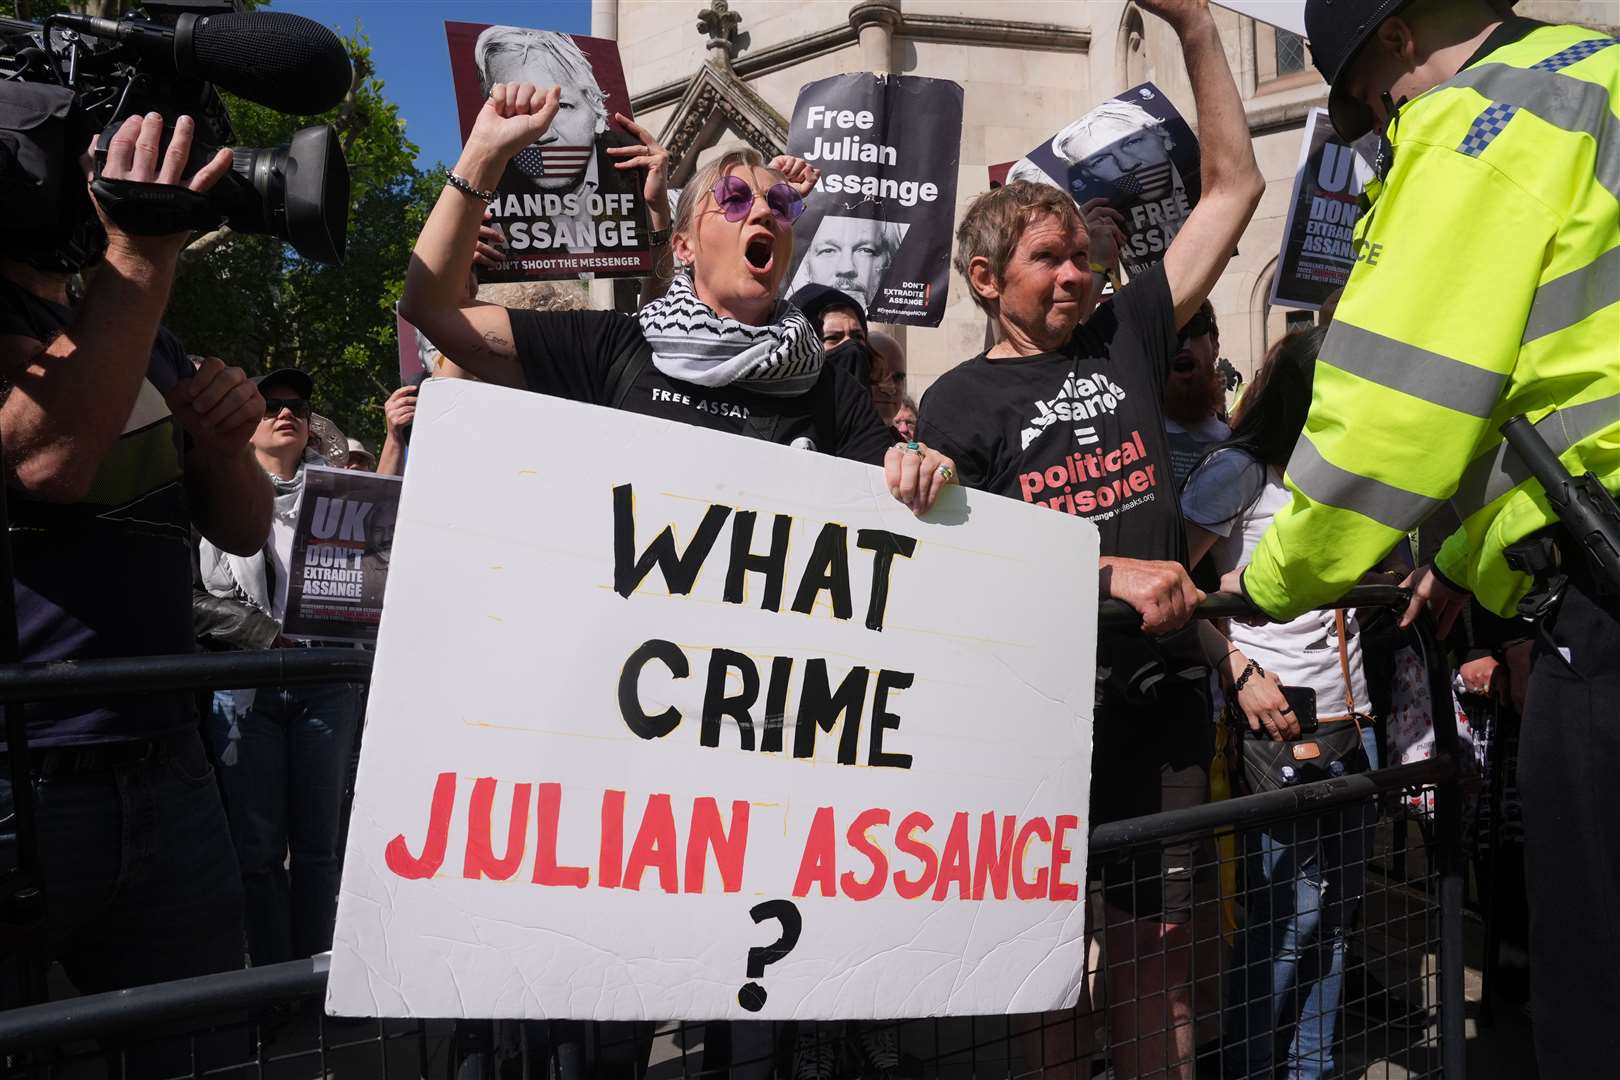 Supporters of Julian Assange outside the Royal Courts of Justice in London (Lucy North/PA)